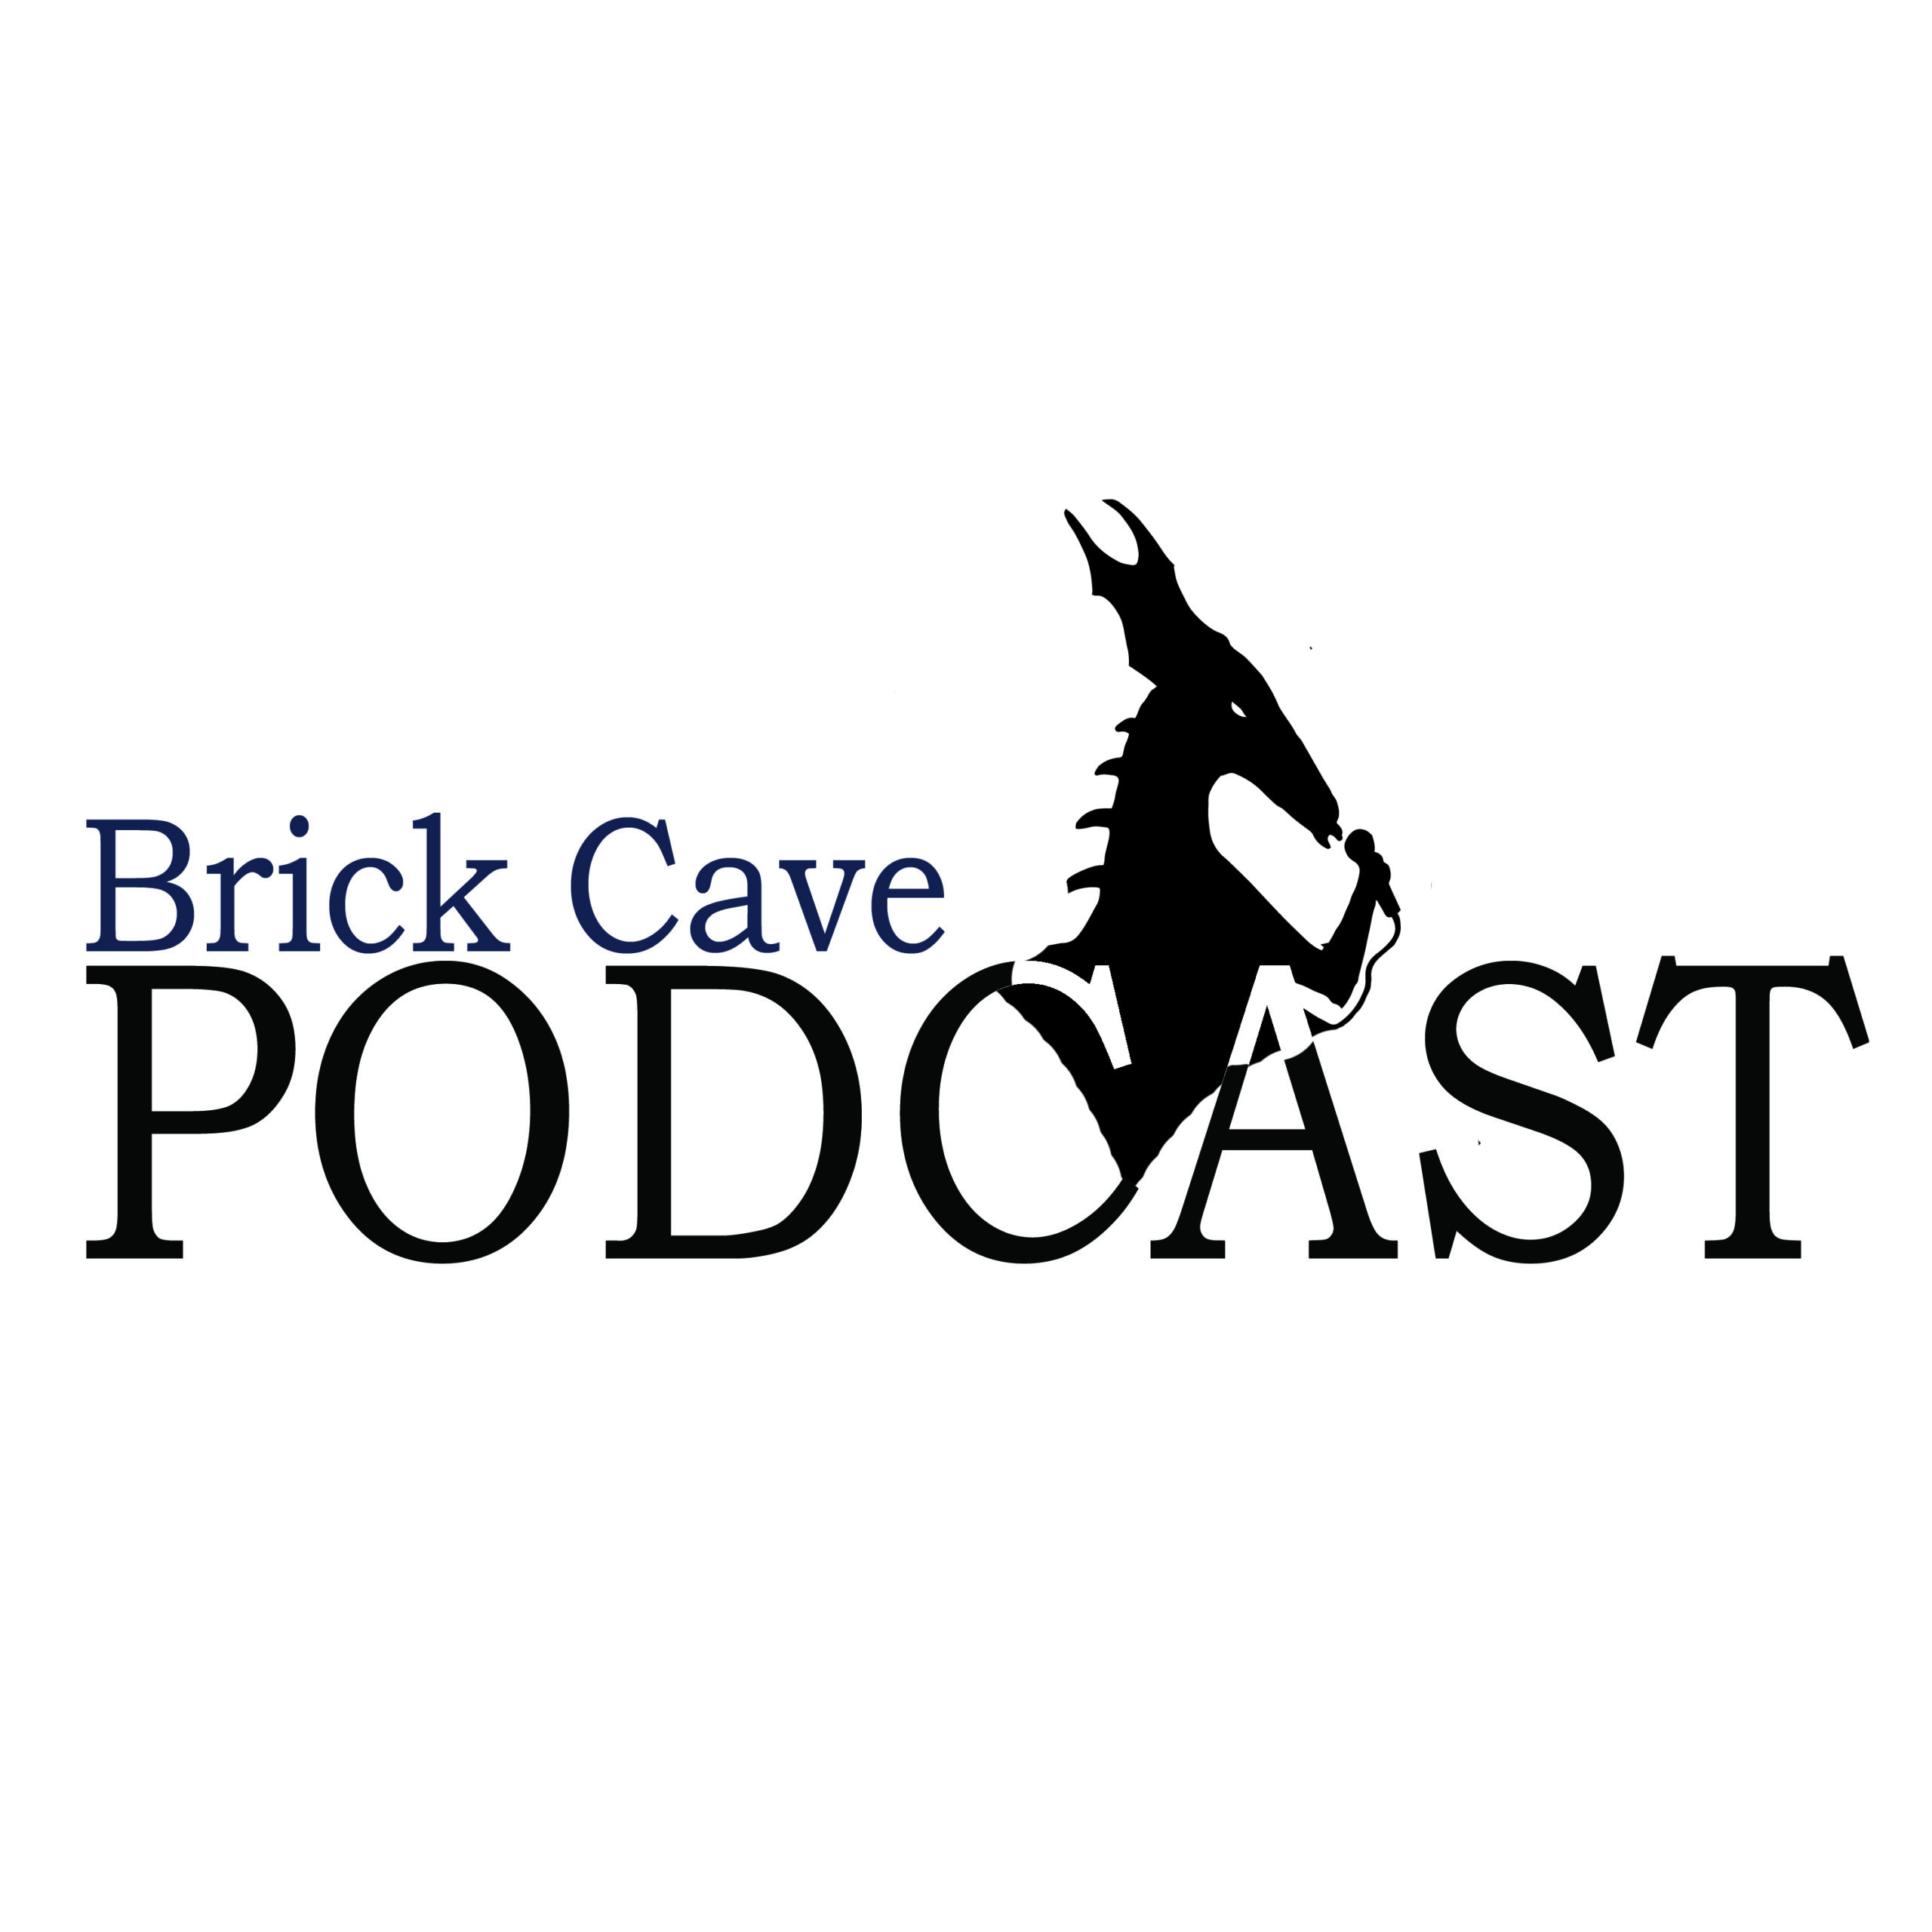 Bruce on the Dec 2020 Brick Cave Podcast